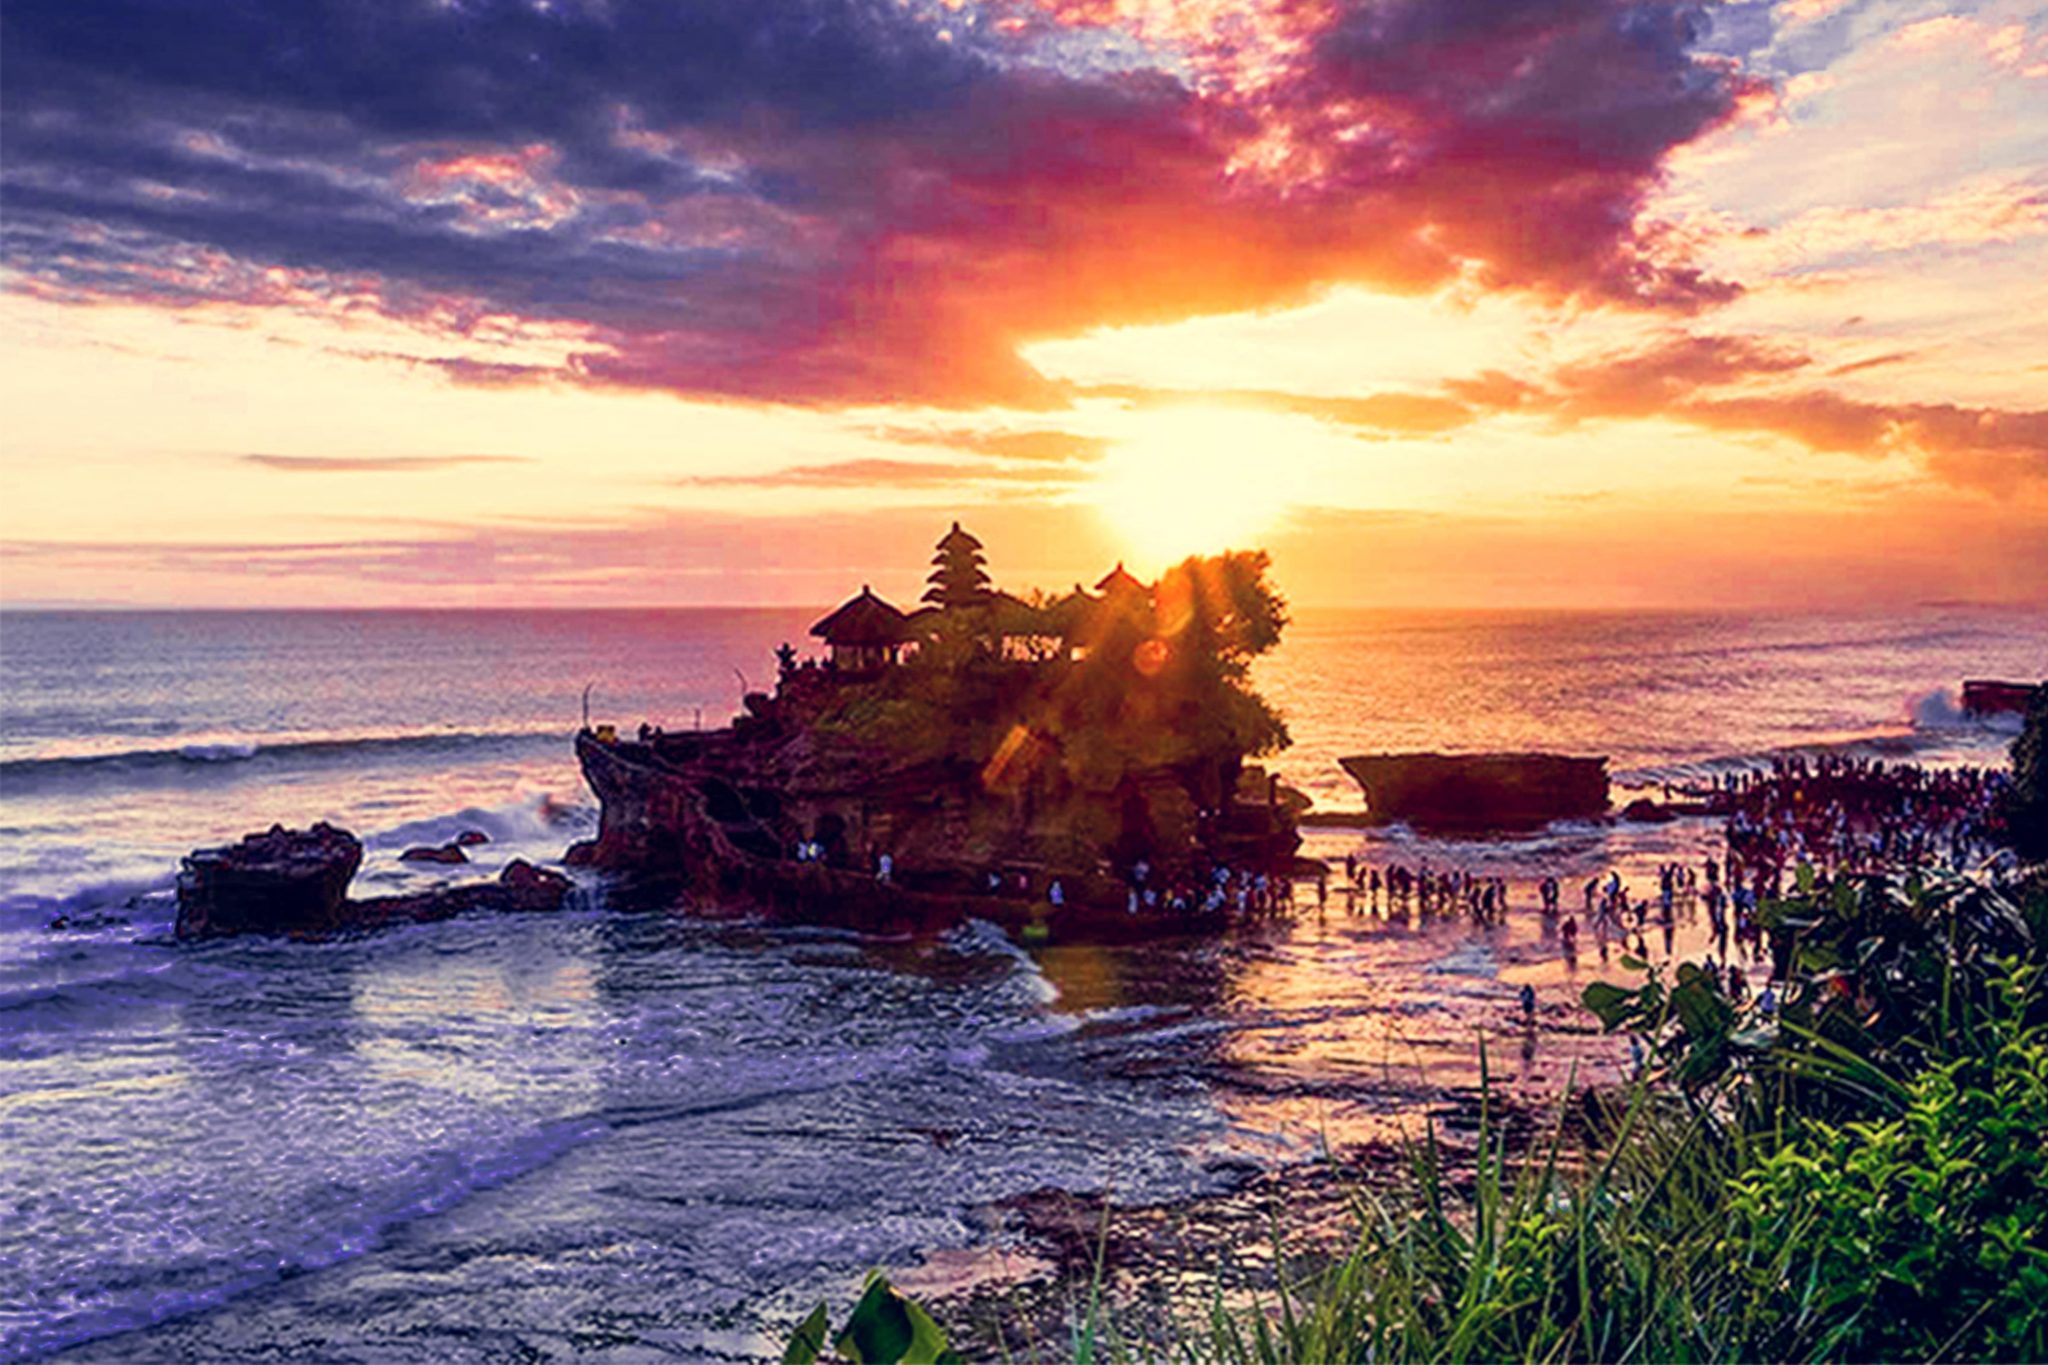 Tanah Lot Sunset Tour Experience Bali With The Best Tour Packages From Local Experts